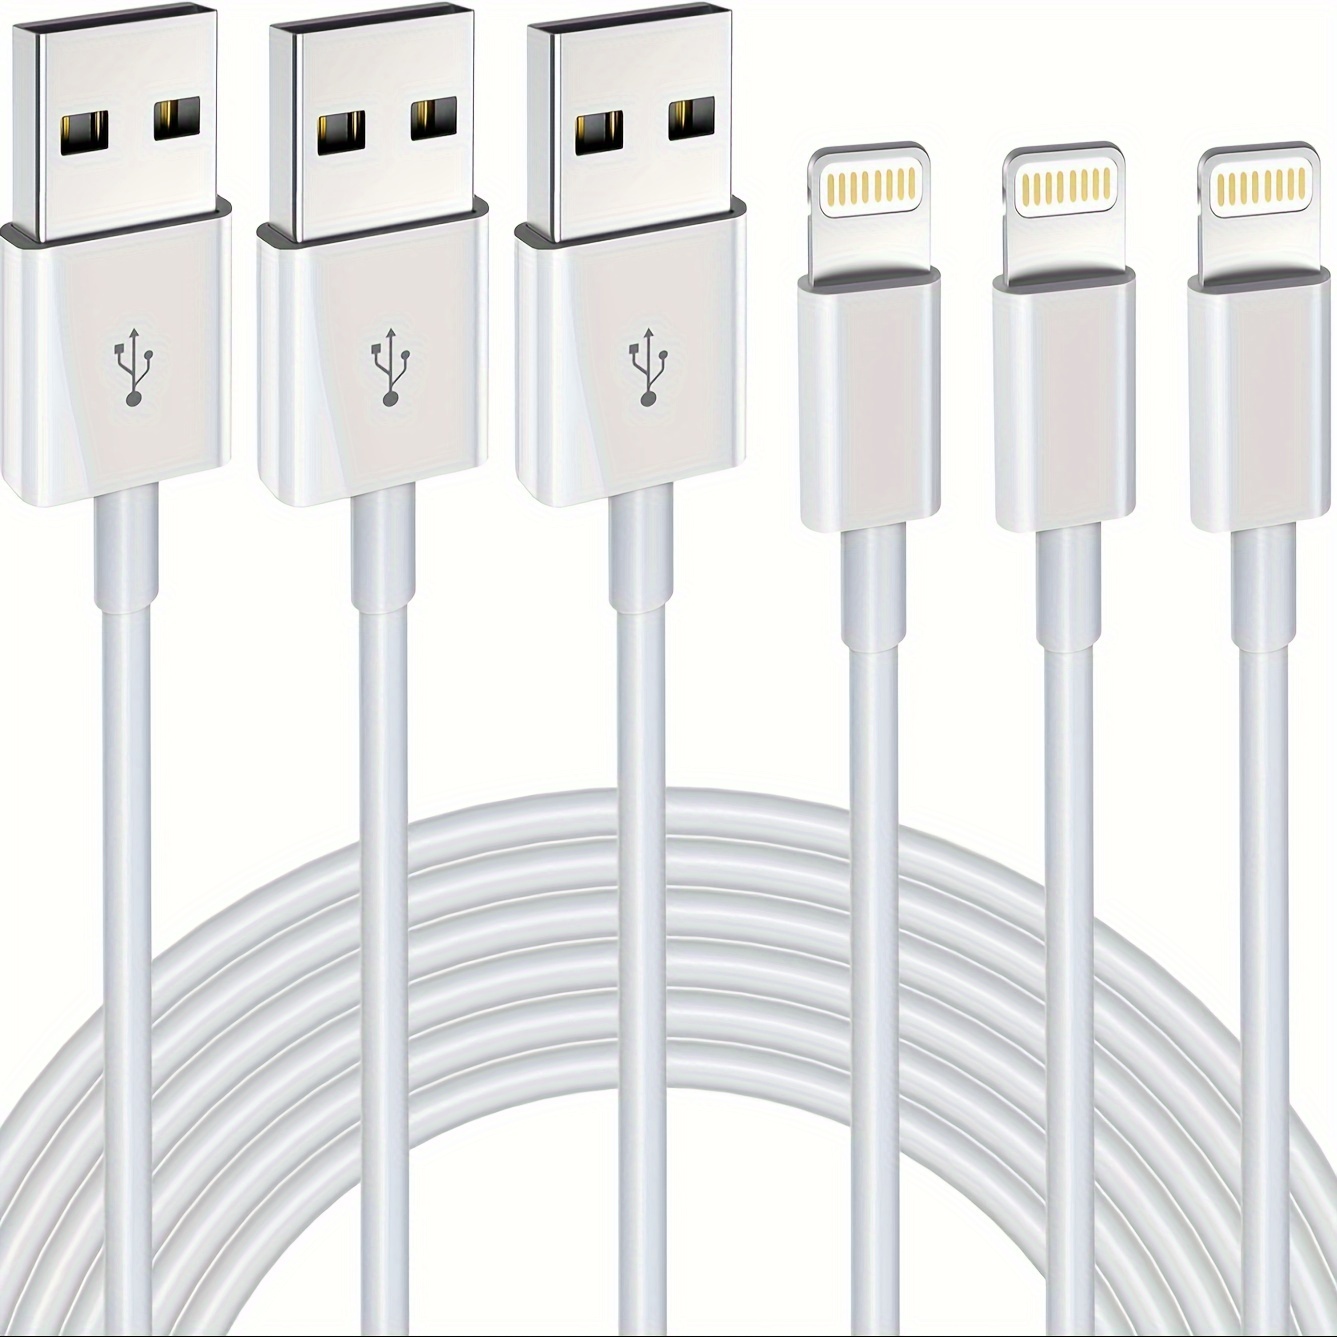 

1-3pcs Mfi Certified To Usb Charging Cables, 2.4a Fast 15/12/11/11pro/11max/xr/xs Max/8/7/6/5s/se, Durable 3/6/10ft Lengths, White